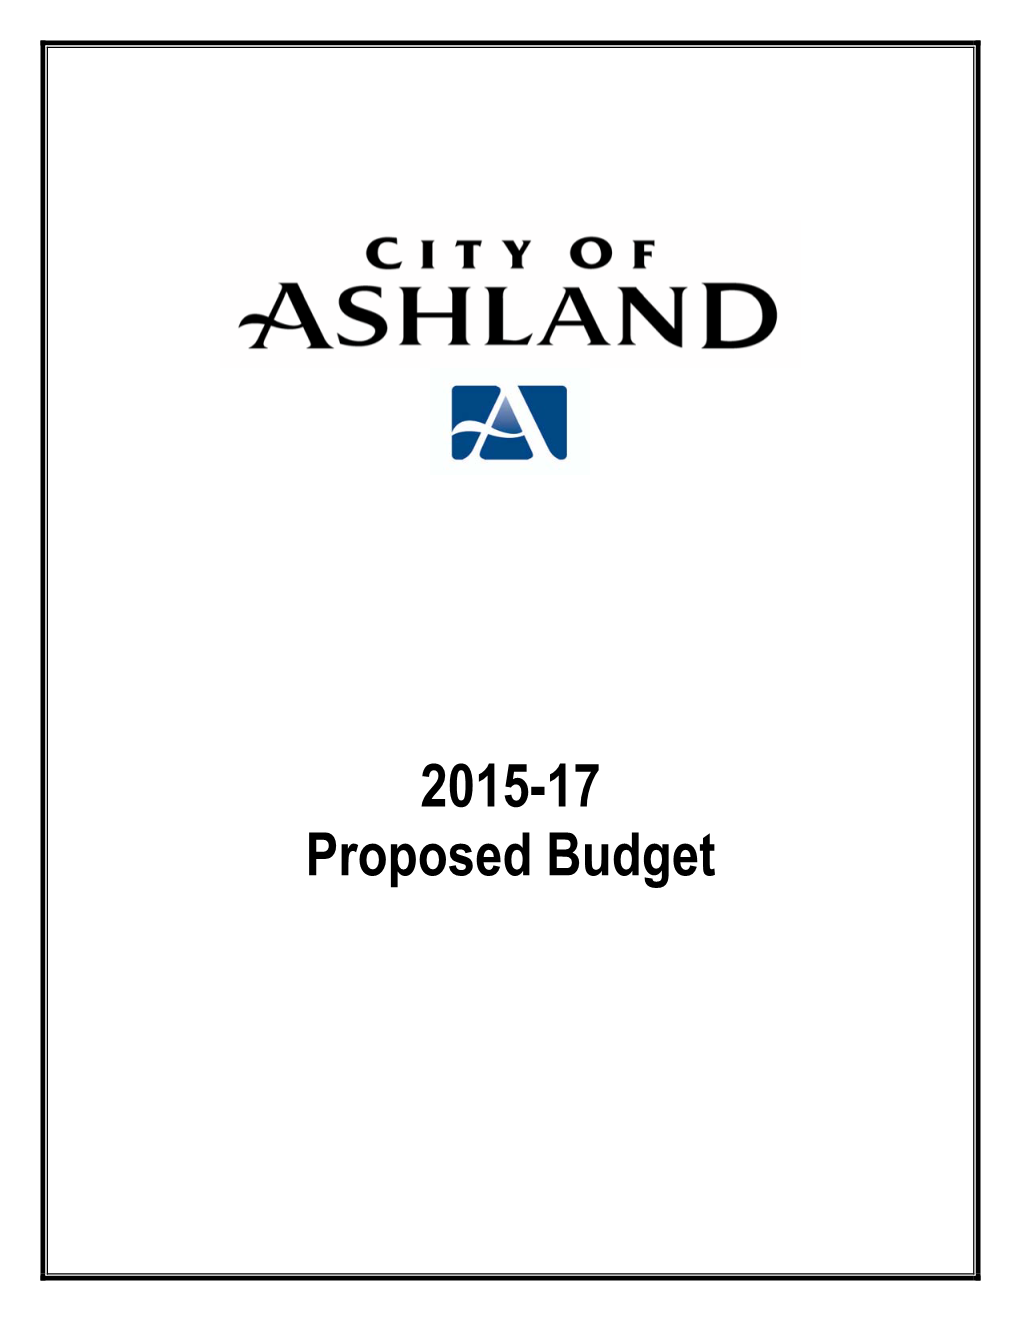 2015-17 Proposed Budget